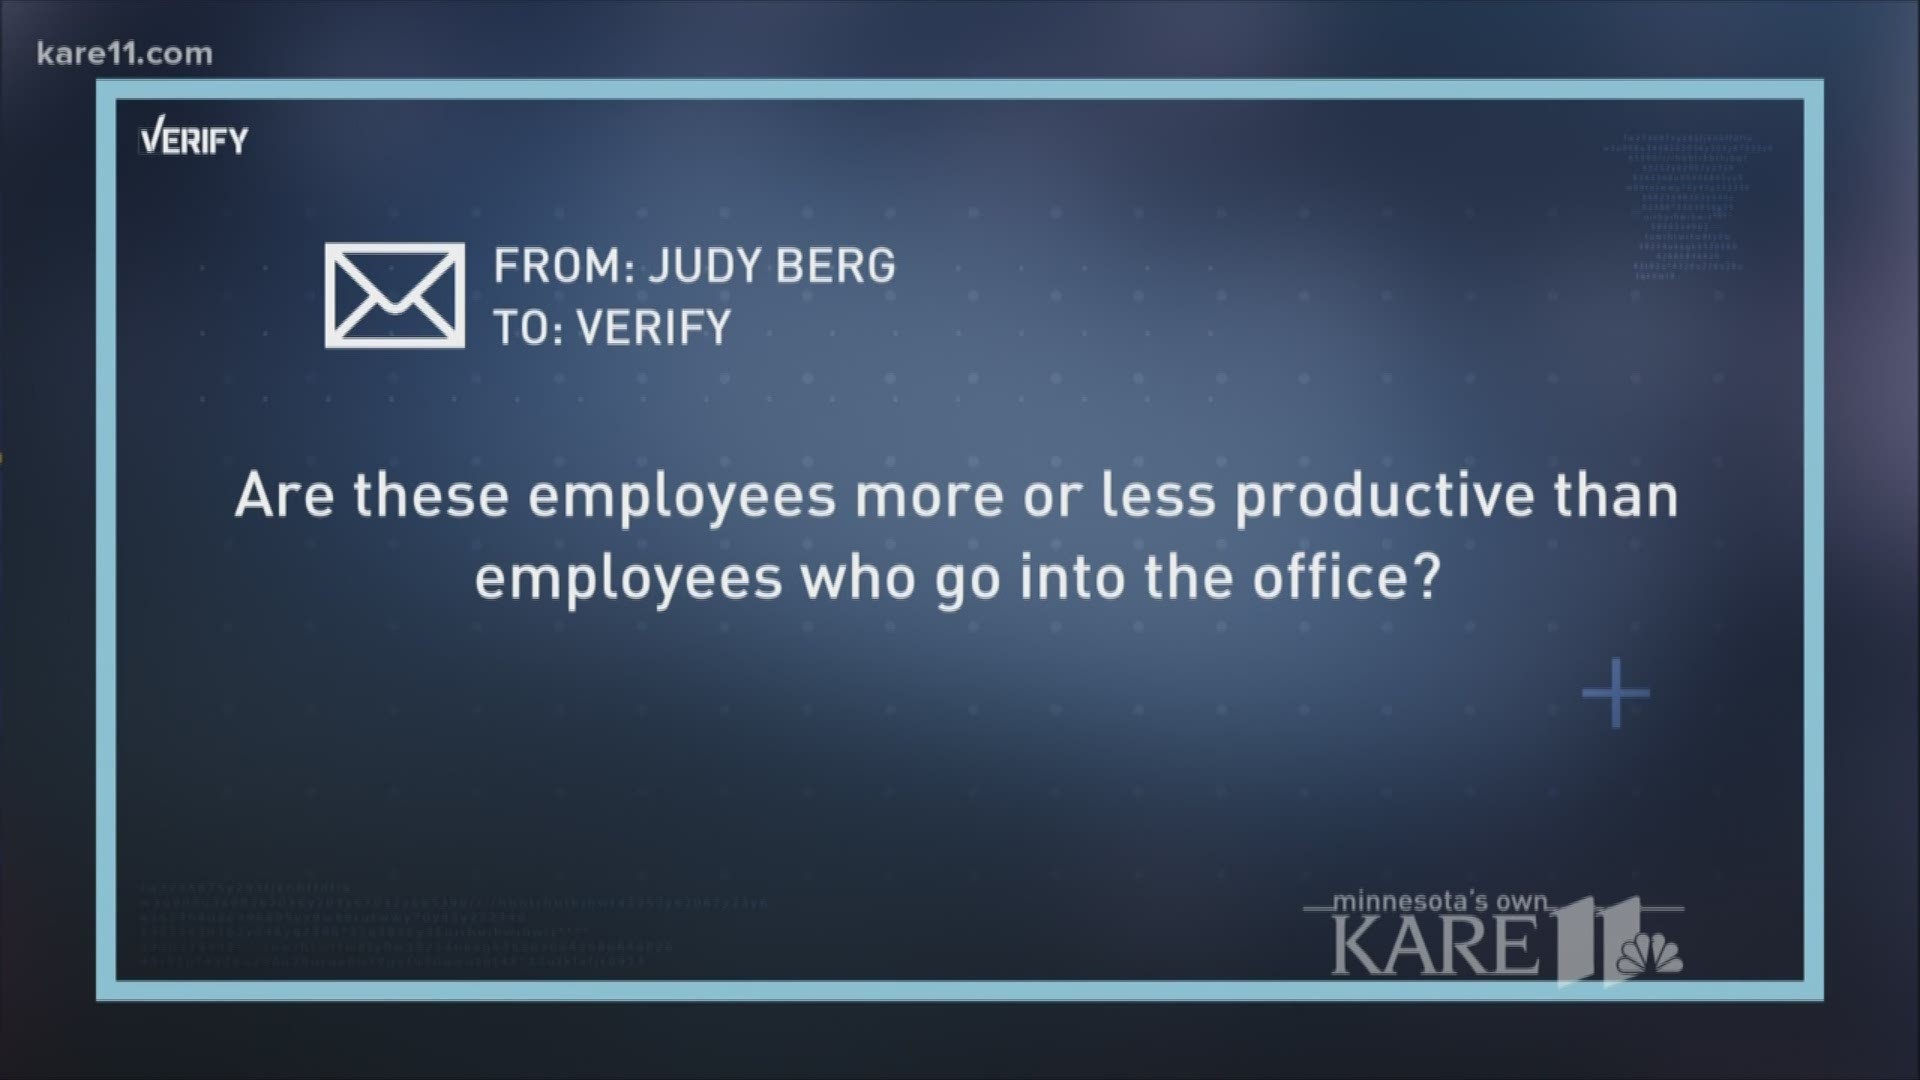 A growing number of people are giving up on the gridlock and getting their work done from home these days. But is it more productive than working from the office? A viewer asked us to #VERIFY. http://kare11.tv/2A11W2J